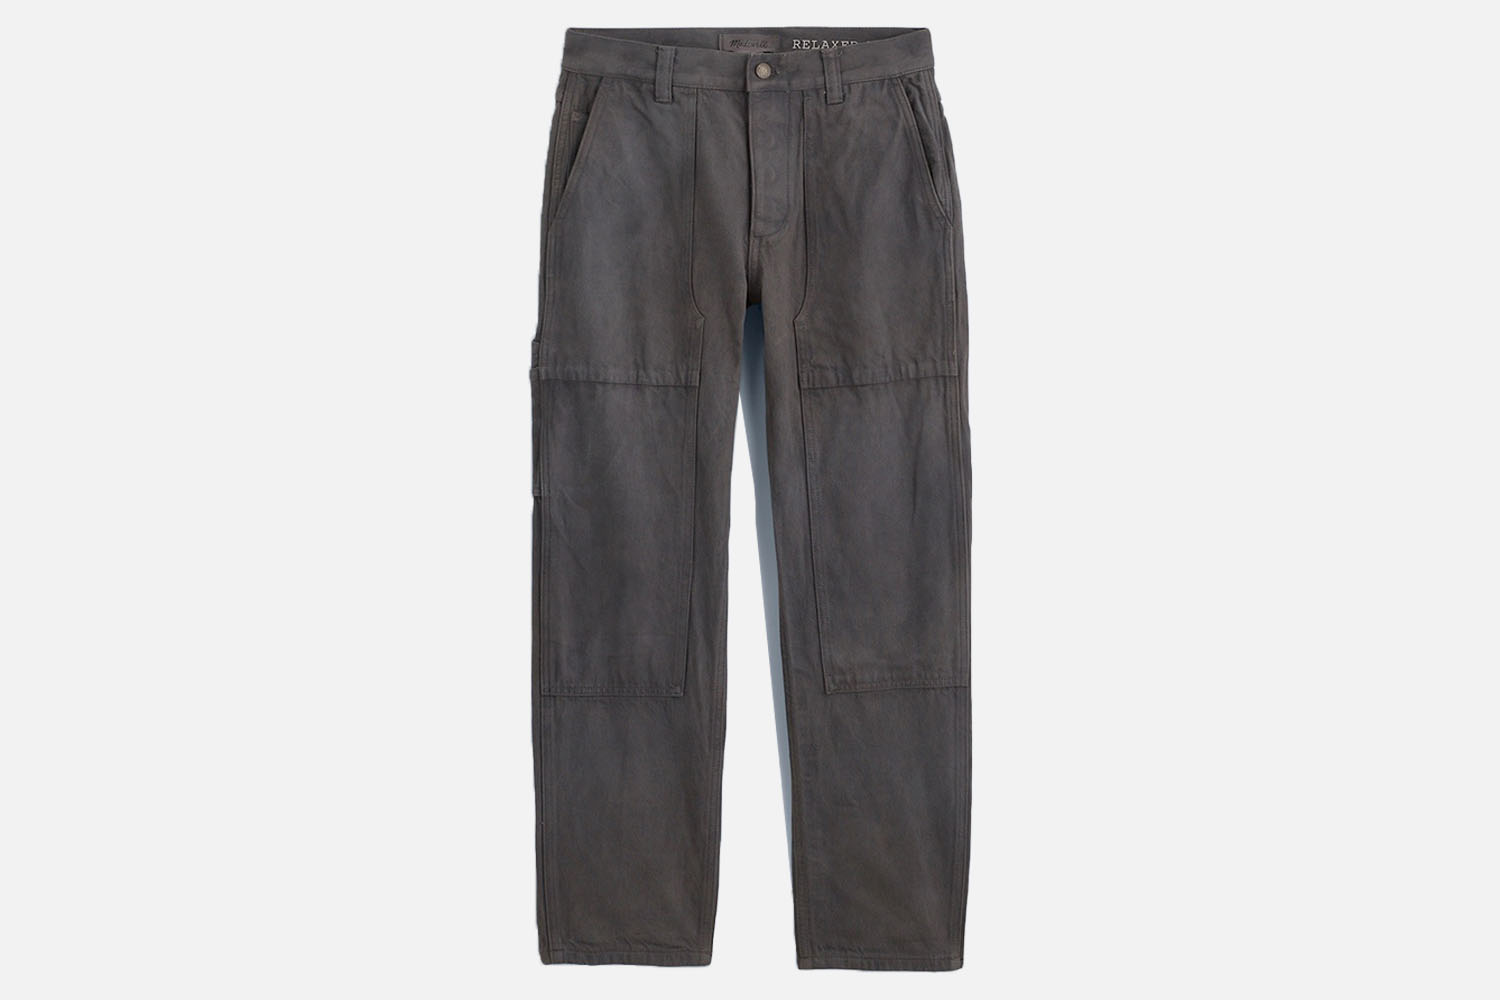 Madewell x MN Dye Studio Relaxed Straight Workwear Pant